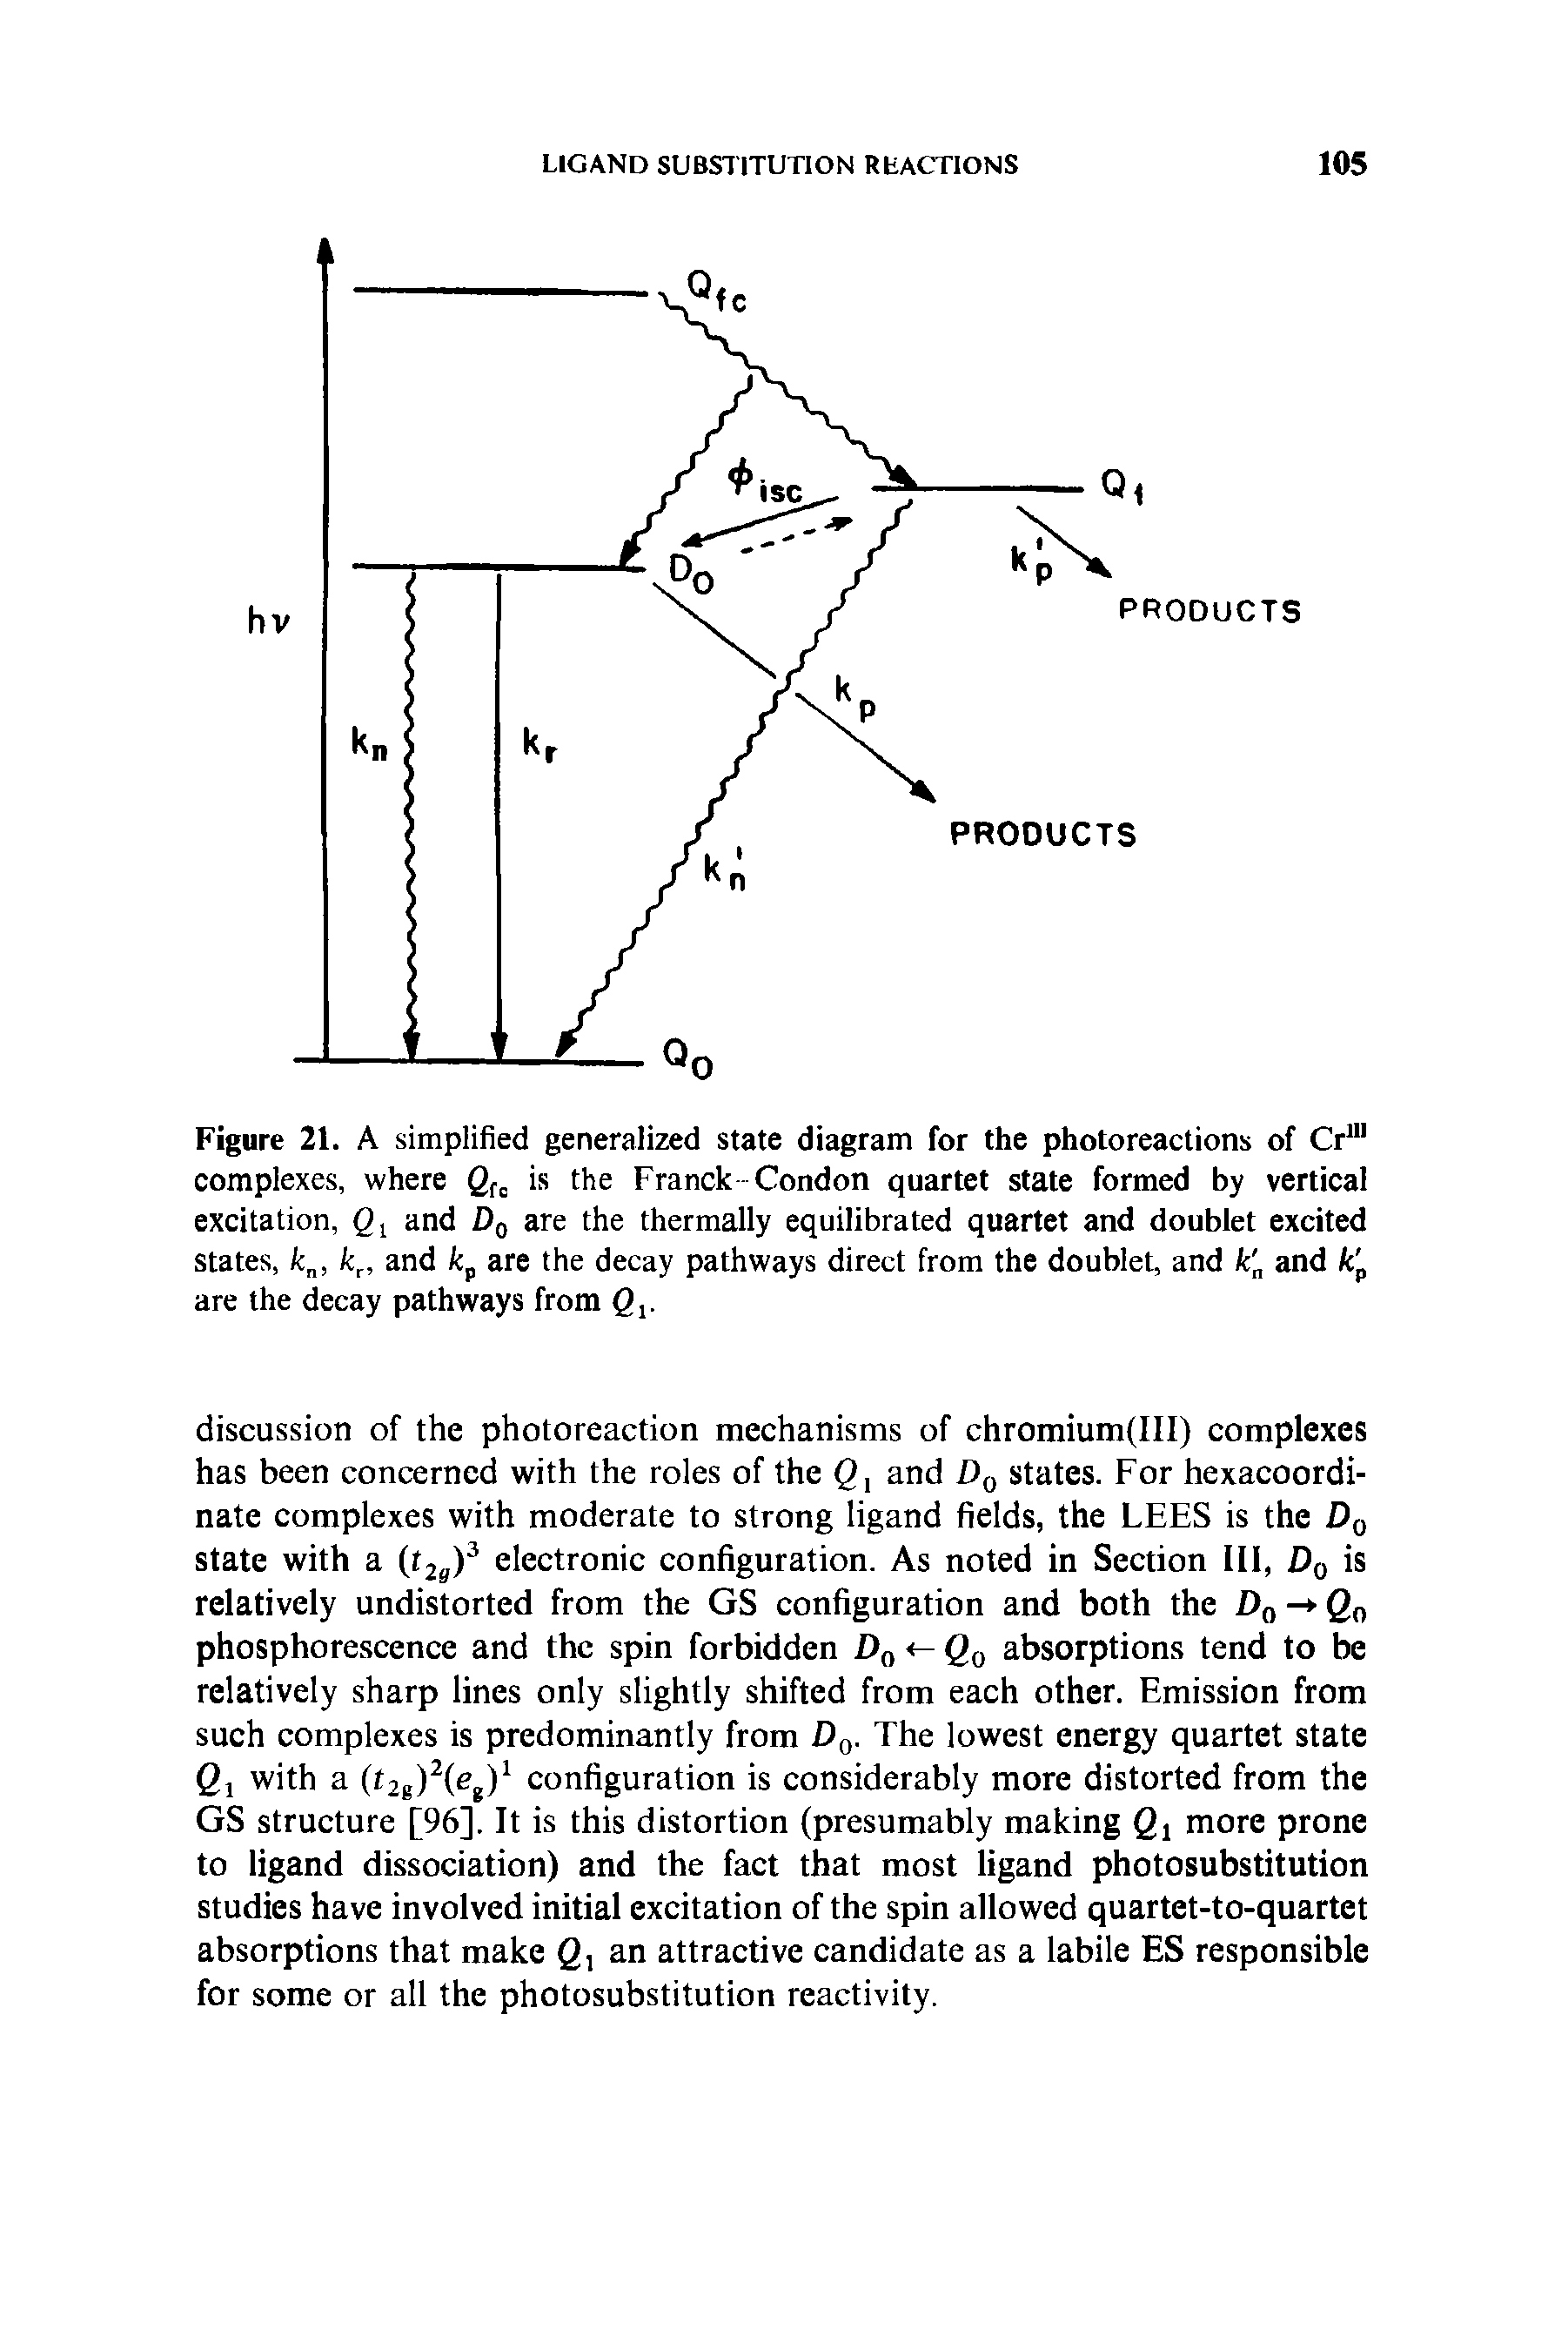 Figure 21. A simplified generalized state diagram for the photoreactions of Cr111 complexes, where Q e is the Franck Condon quartet state formed by vertical excitation, Ql and D0 are the thermally equilibrated quartet and doublet excited states, kn, kr, and kp are the decay pathways direct from the doublet, and k n and k p are the decay pathways from Qj.